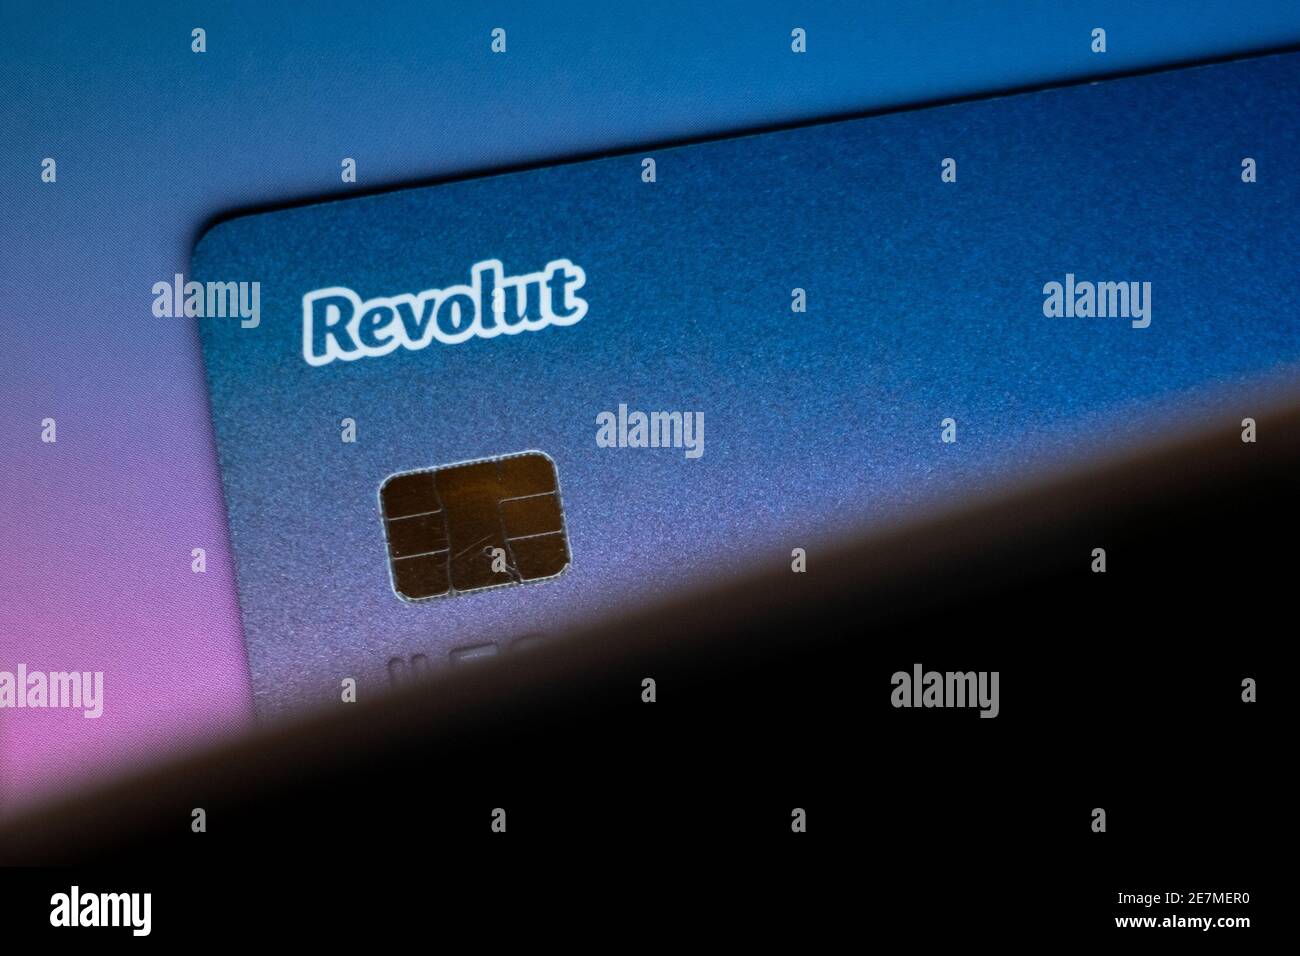 Revolut bank card. Revolut is UK based global financial technology company offering modern banking services with low fees. Stock Photo